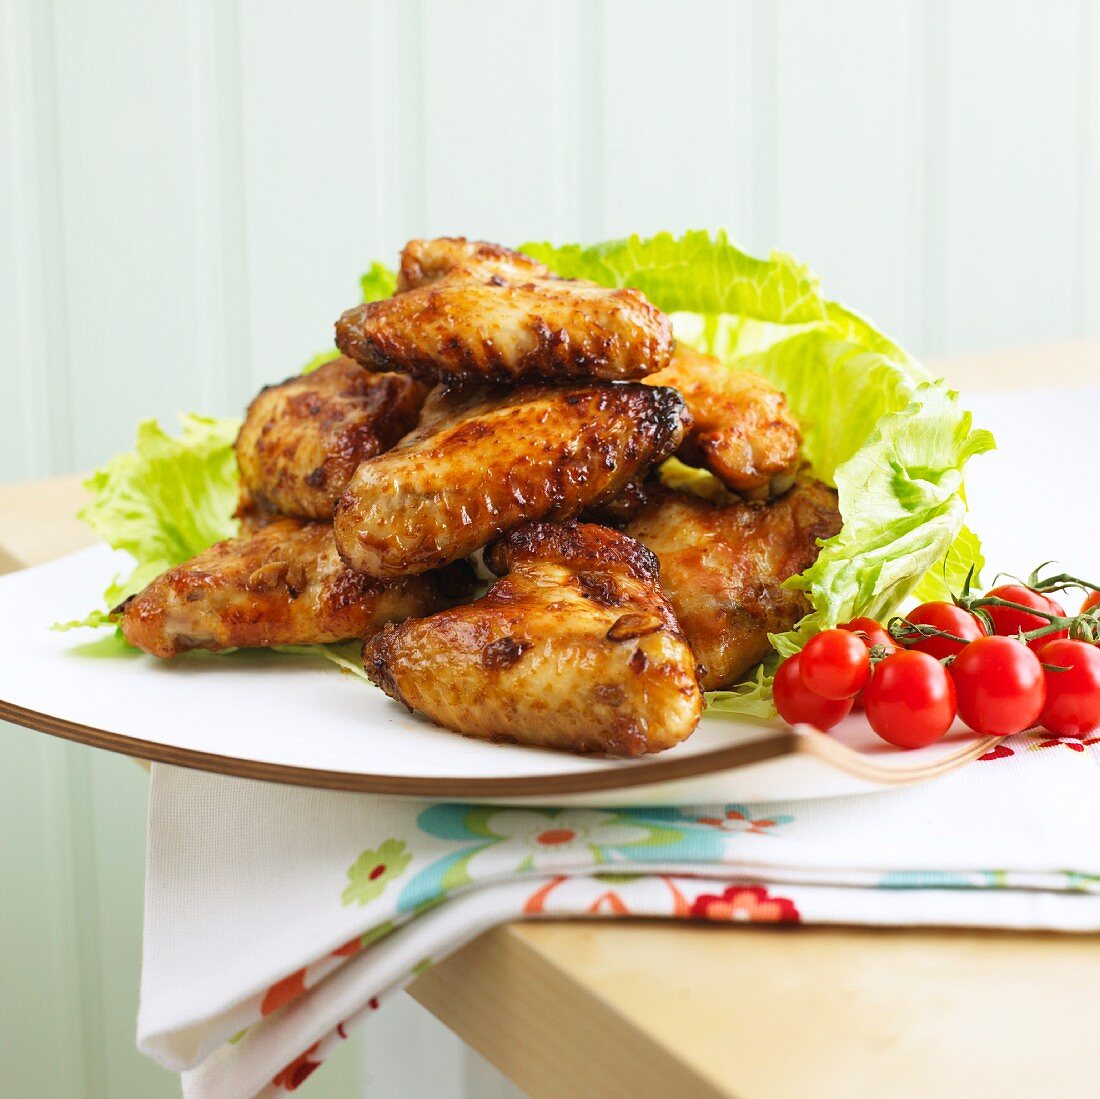 Chicken wings glazed with soy sauce